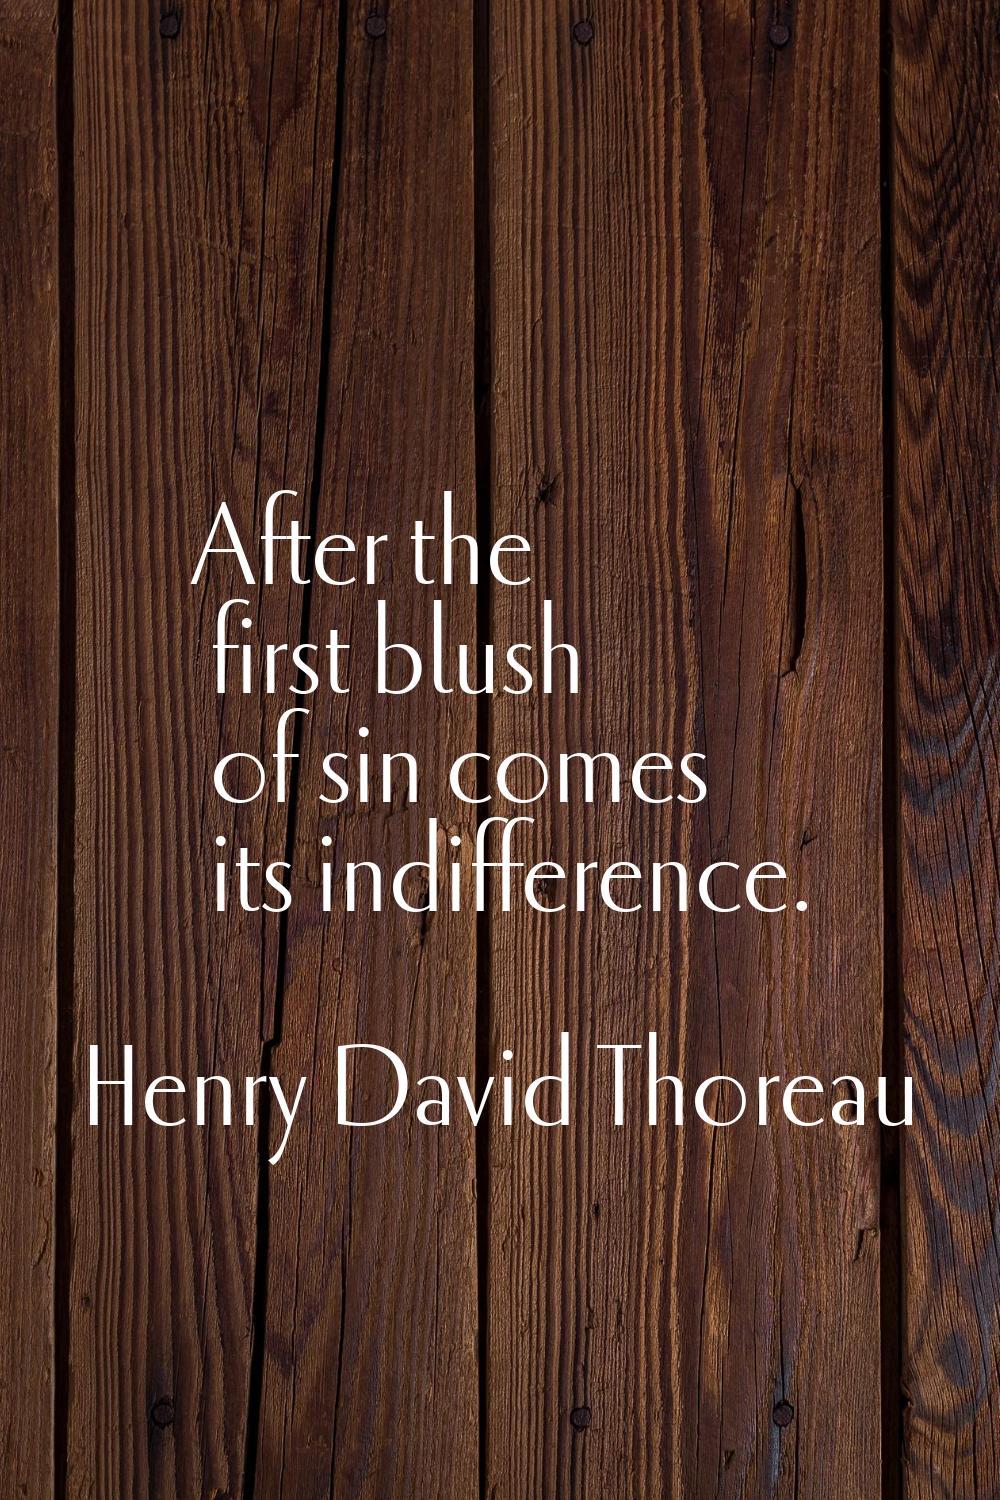 After the first blush of sin comes its indifference.